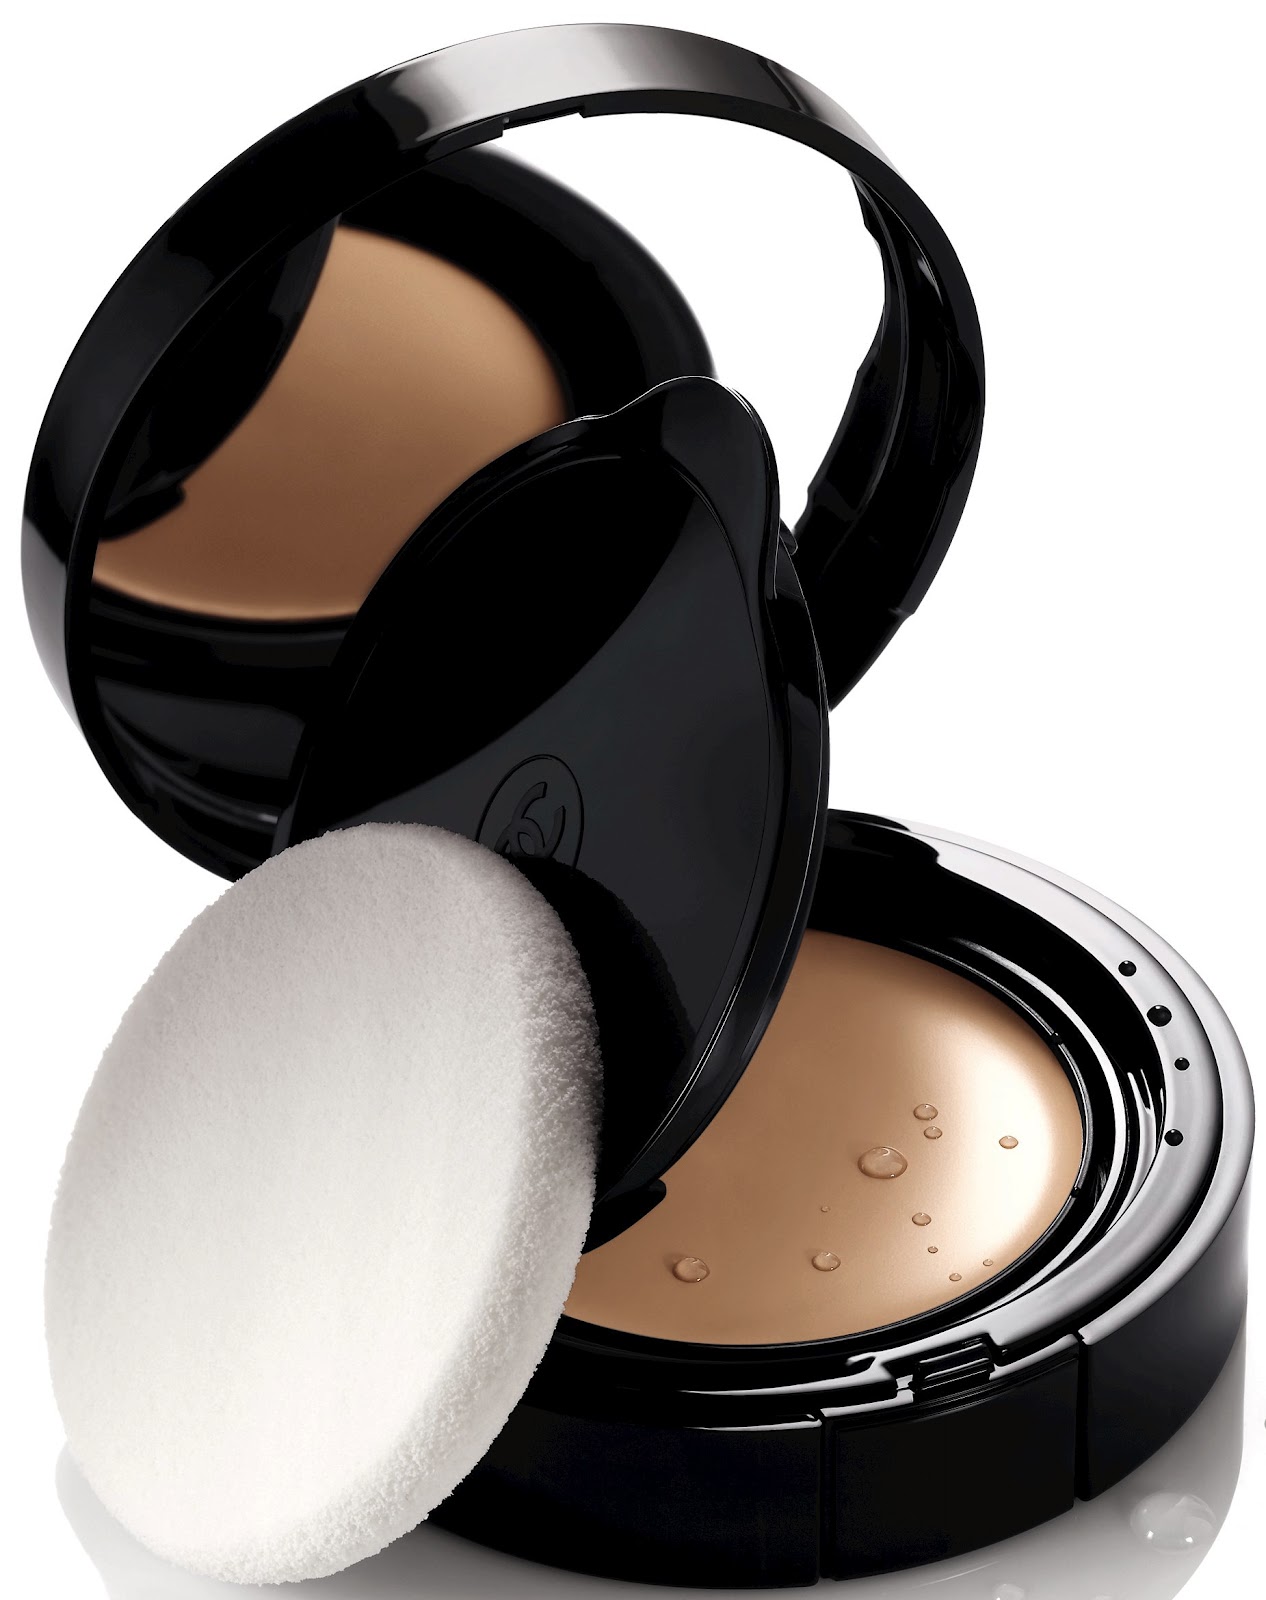 My Search For a New Foundation Love: Part 2 - The Beauty Look Book